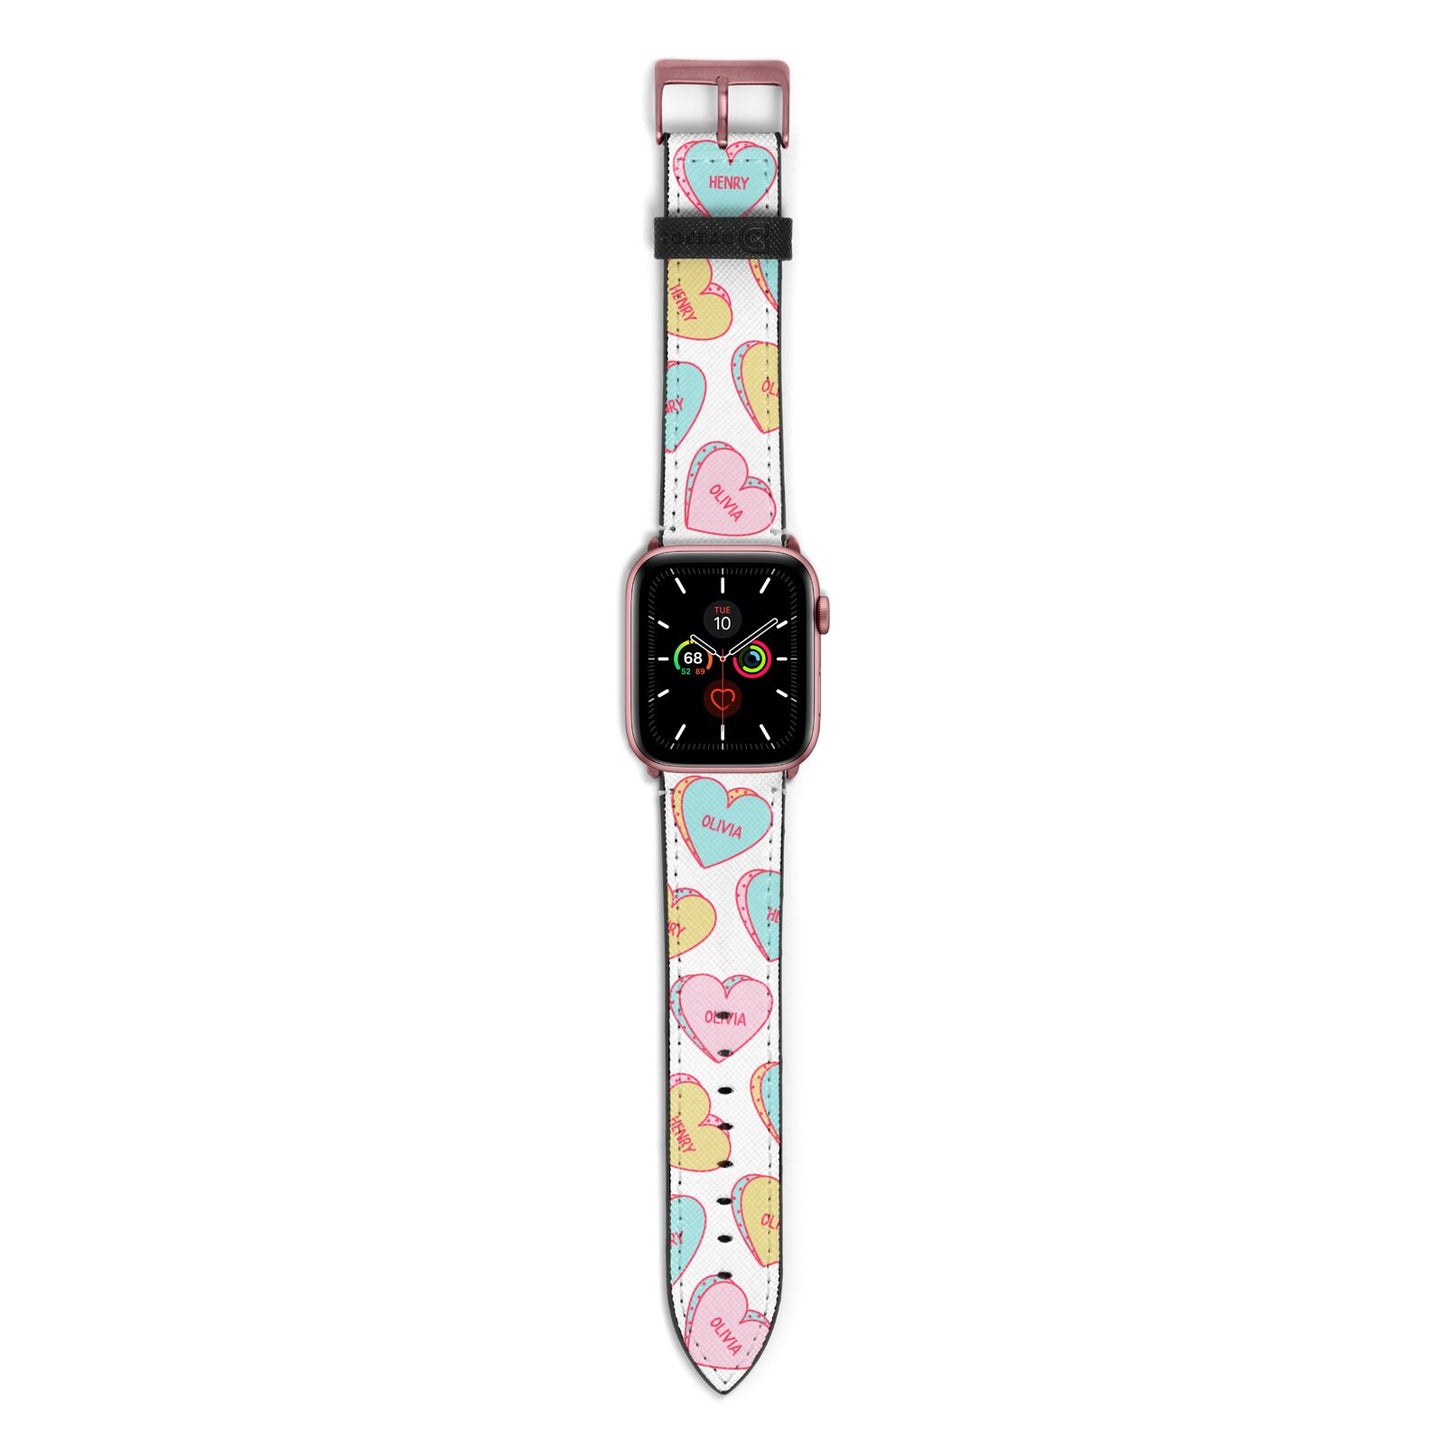 Personalised Heart Sweets Apple Watch Strap with Rose Gold Hardware